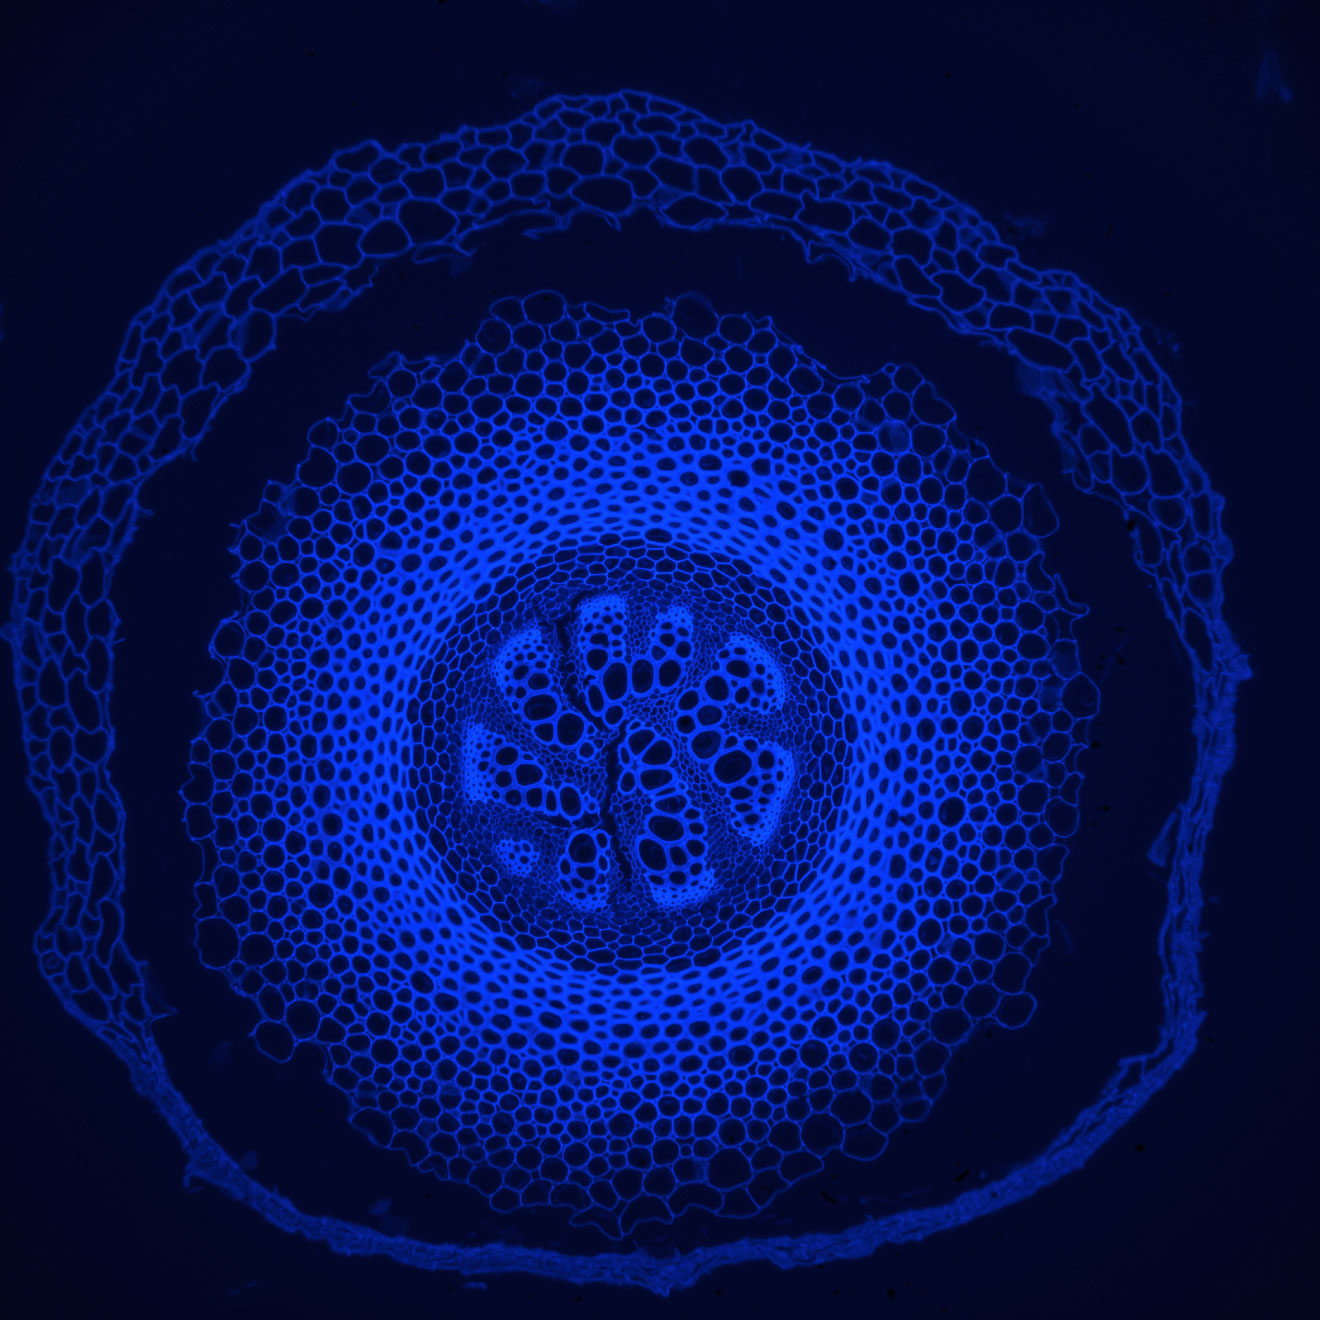 Blue circle with many cells inside forming different patterns. Background is black.